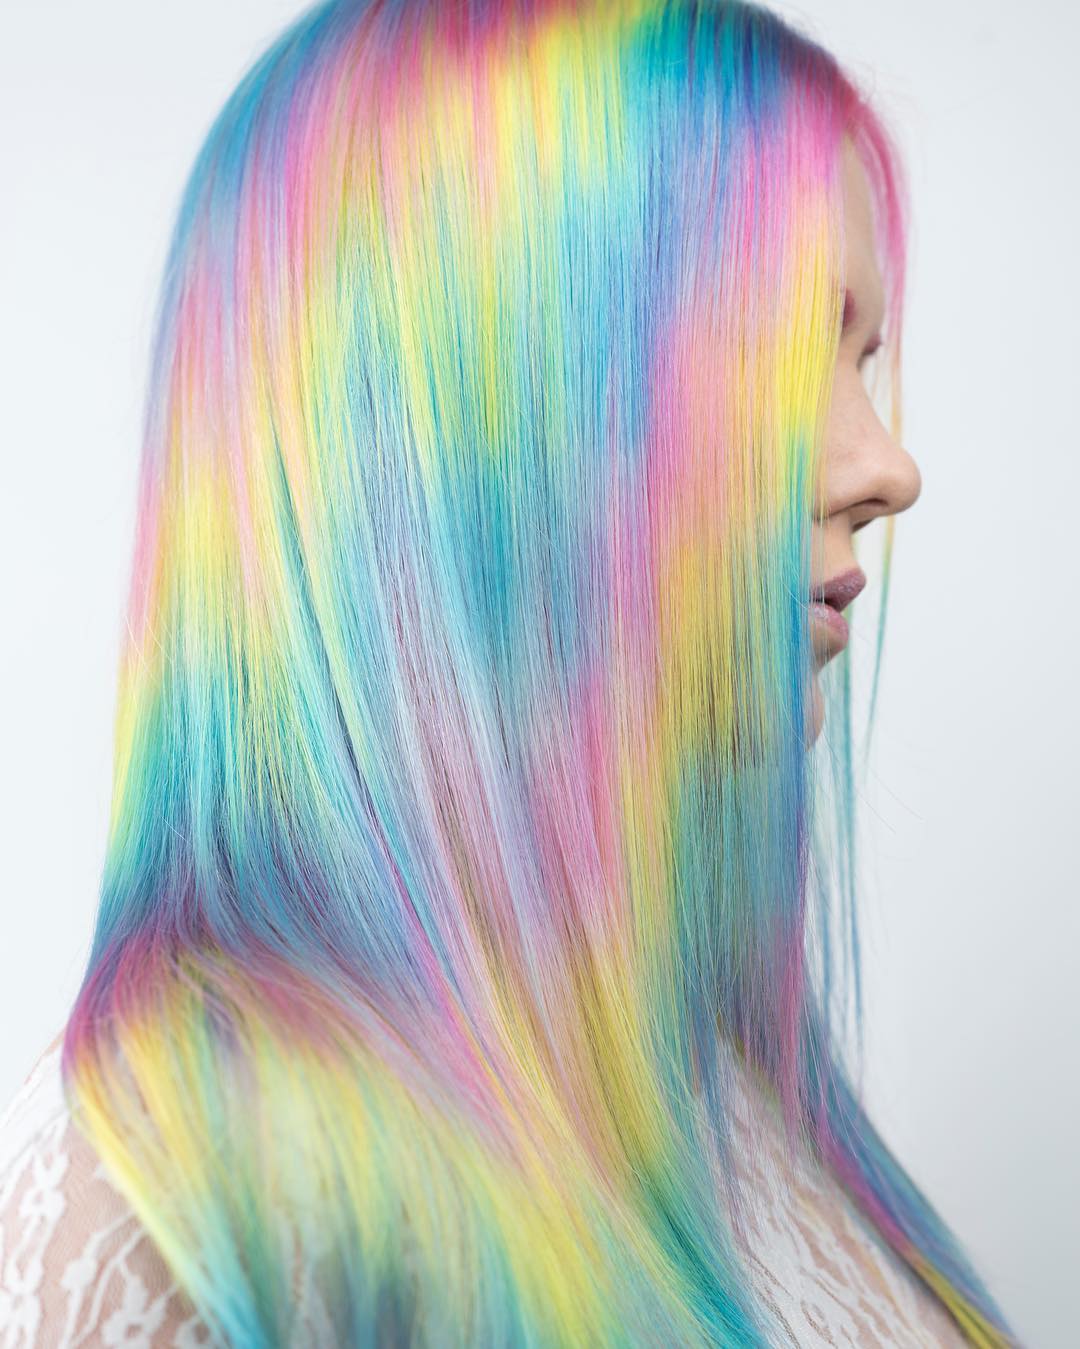 Holographic Hair Takes the Art of Self-Expression over the Rainbow